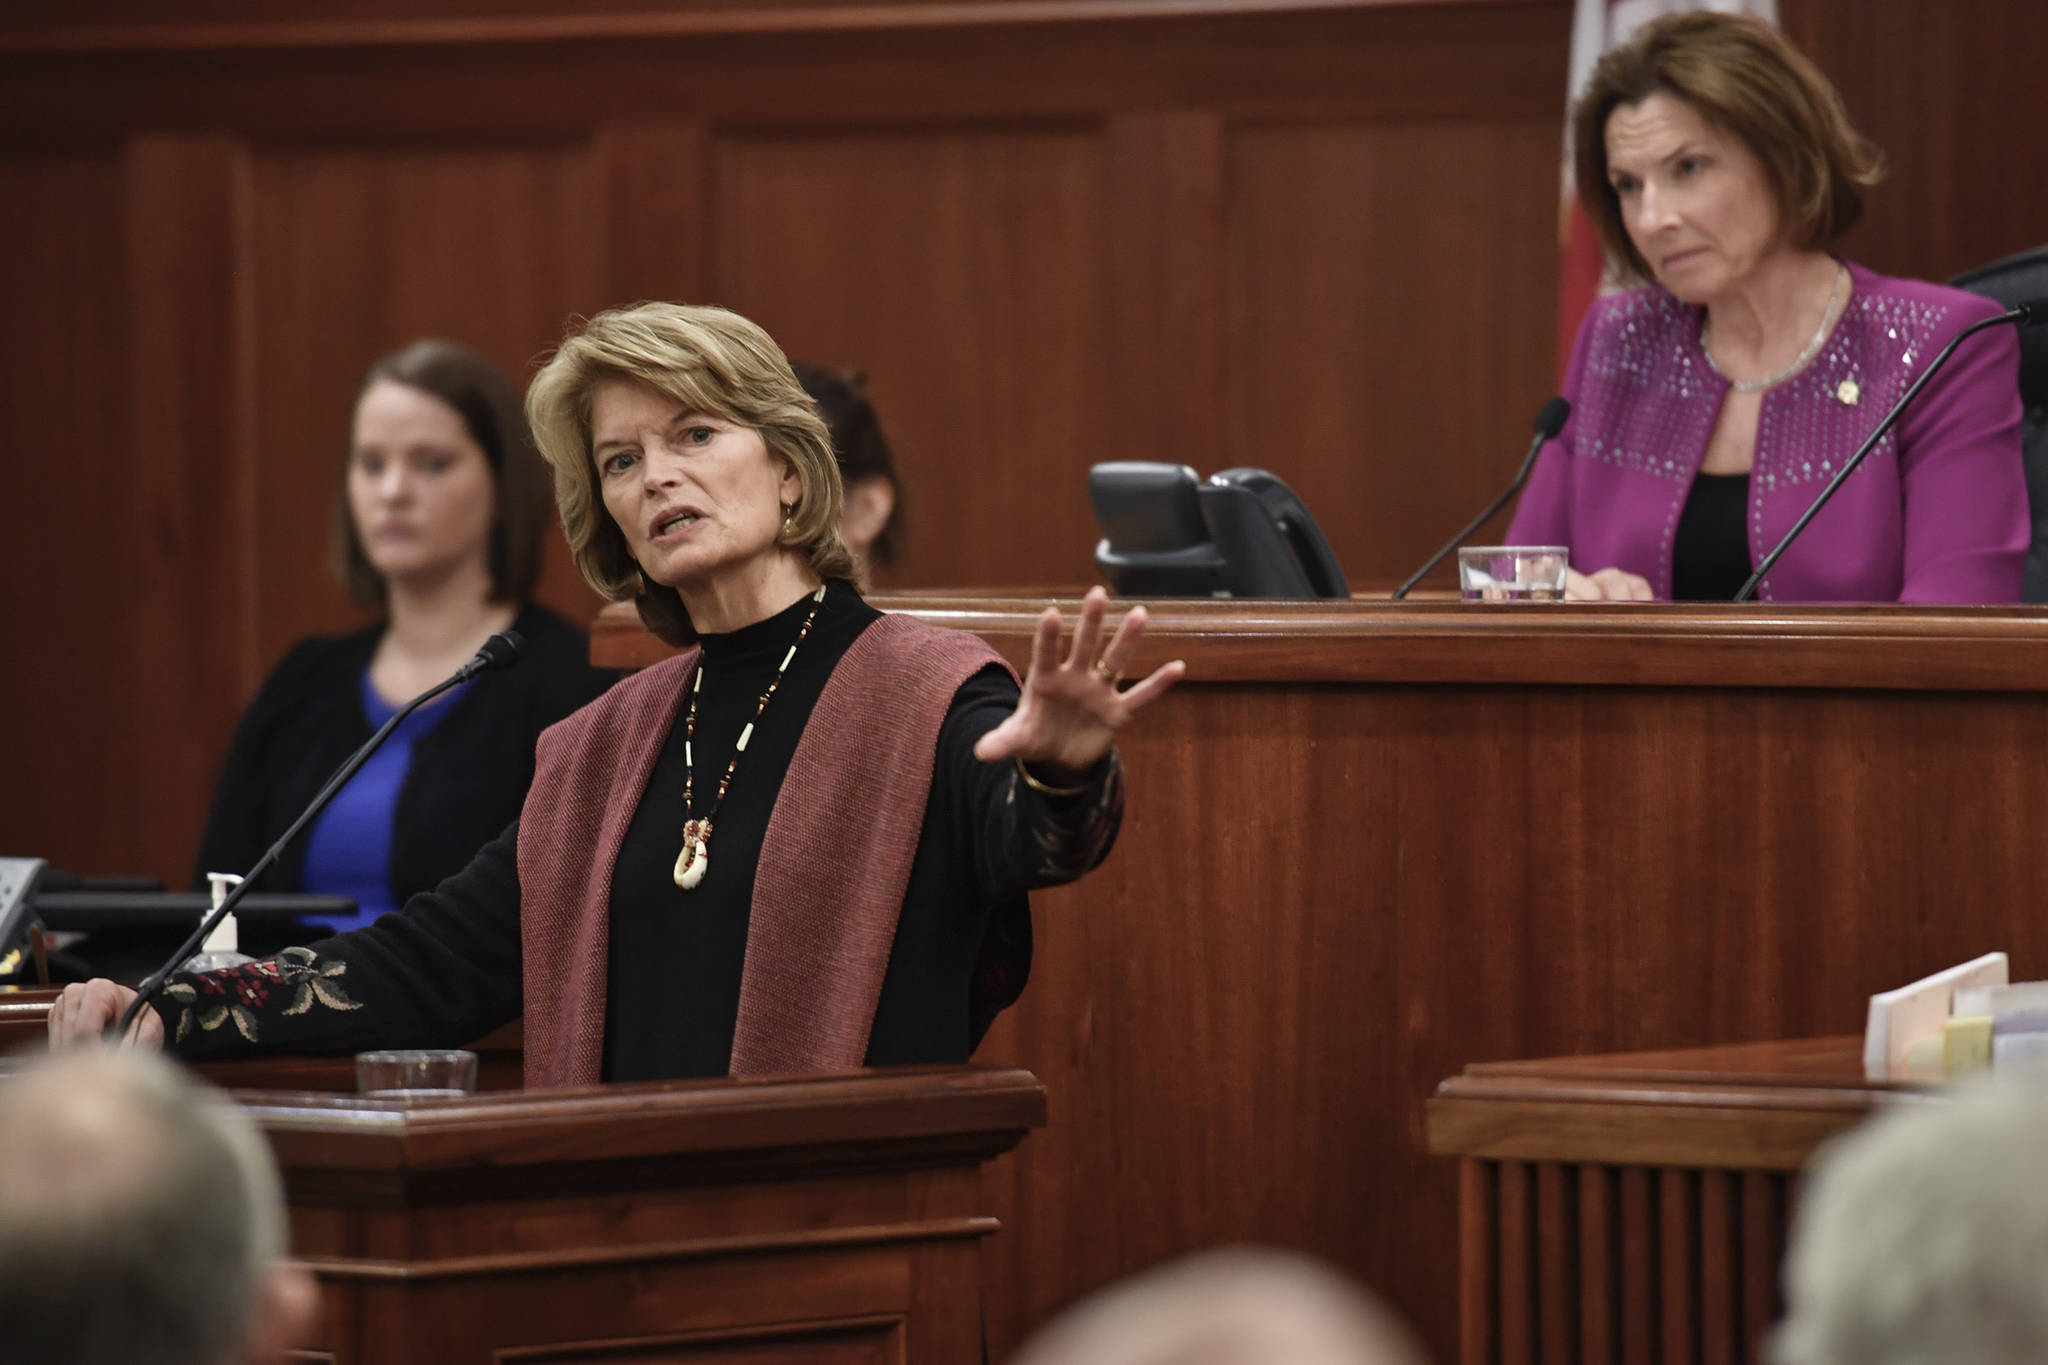 In this Feb. 19, 2019 photo, U.S. Sen. Lisa Murkowski, R-Alaska, delivers her annual speech to a Joint Session of the Alaska Legislature as Senate President Cathy Giessel, R-Anchorage, looks on. (Michael Penn | Juneau Empire File)